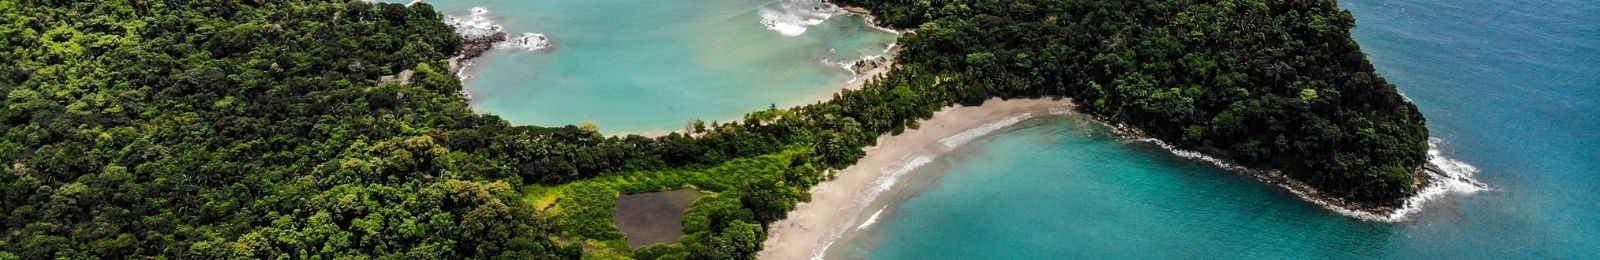 A Boater’s Guide to Costa Rica’s Shores